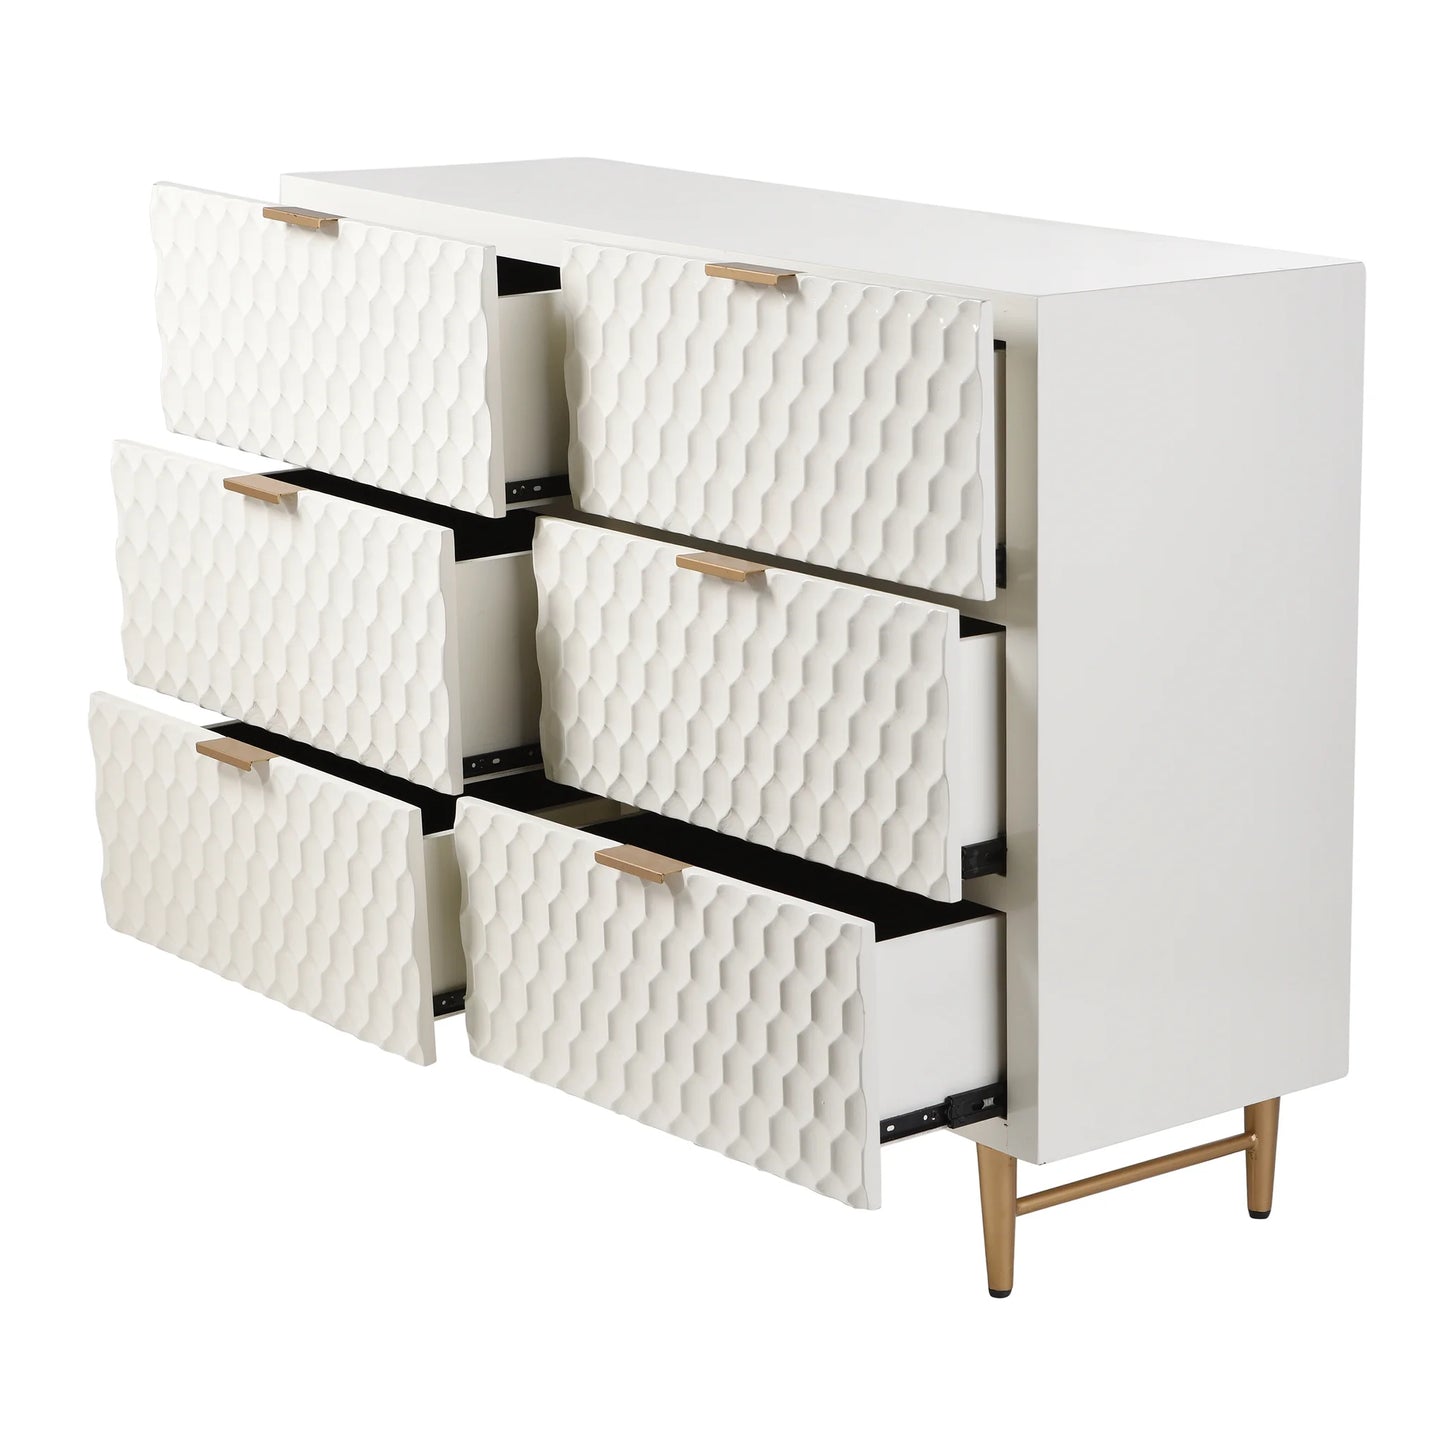 Cream Textured Contemporary Cabinet With Gold Hardware